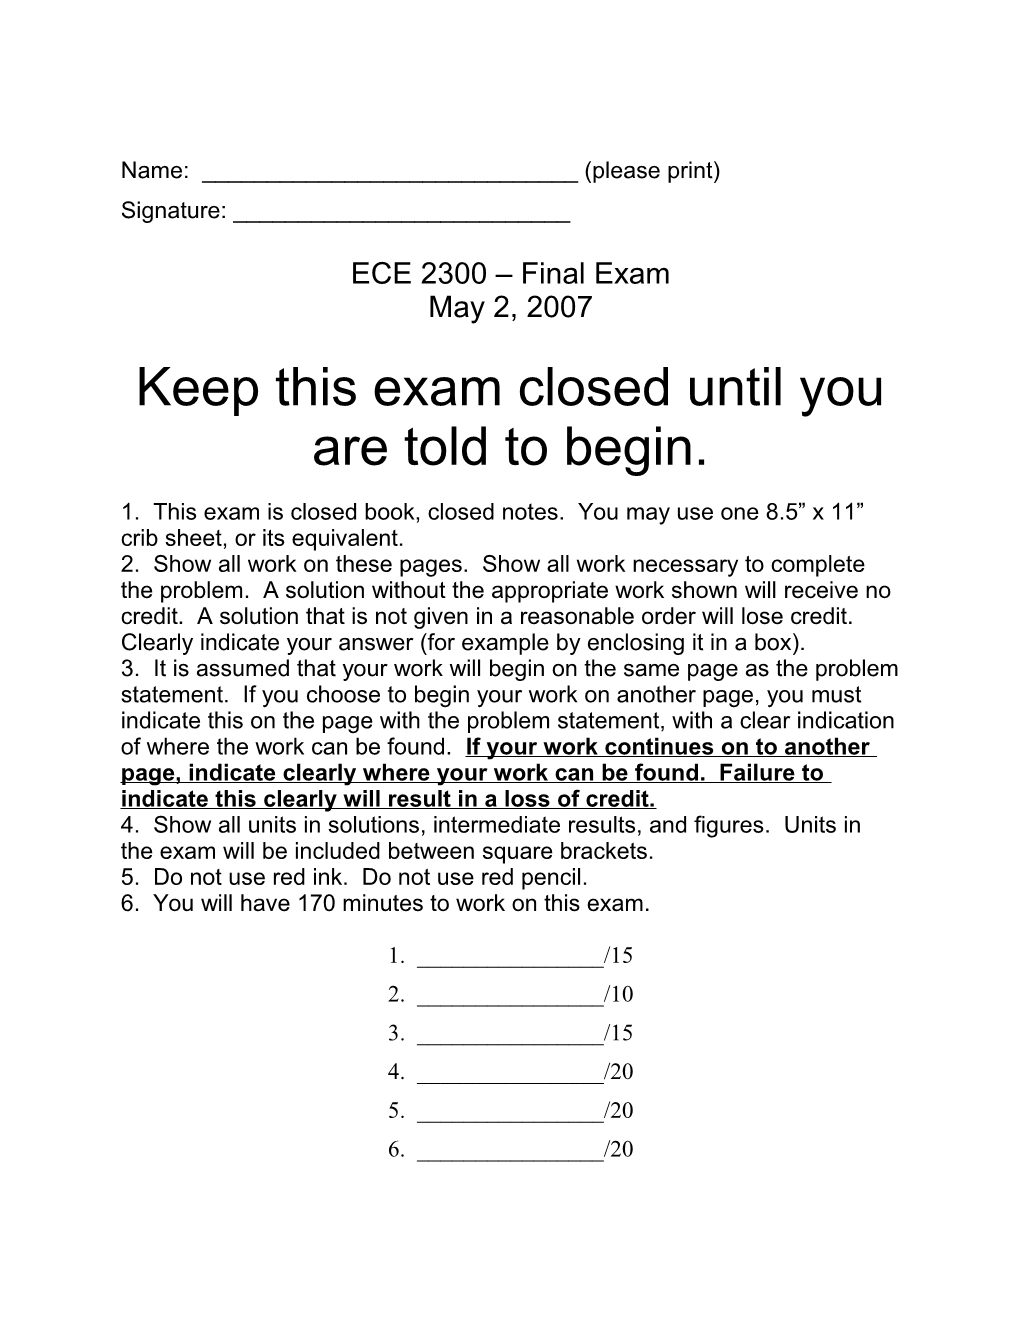 ECE 2300 Final Exam May 2, 2007 Page 1